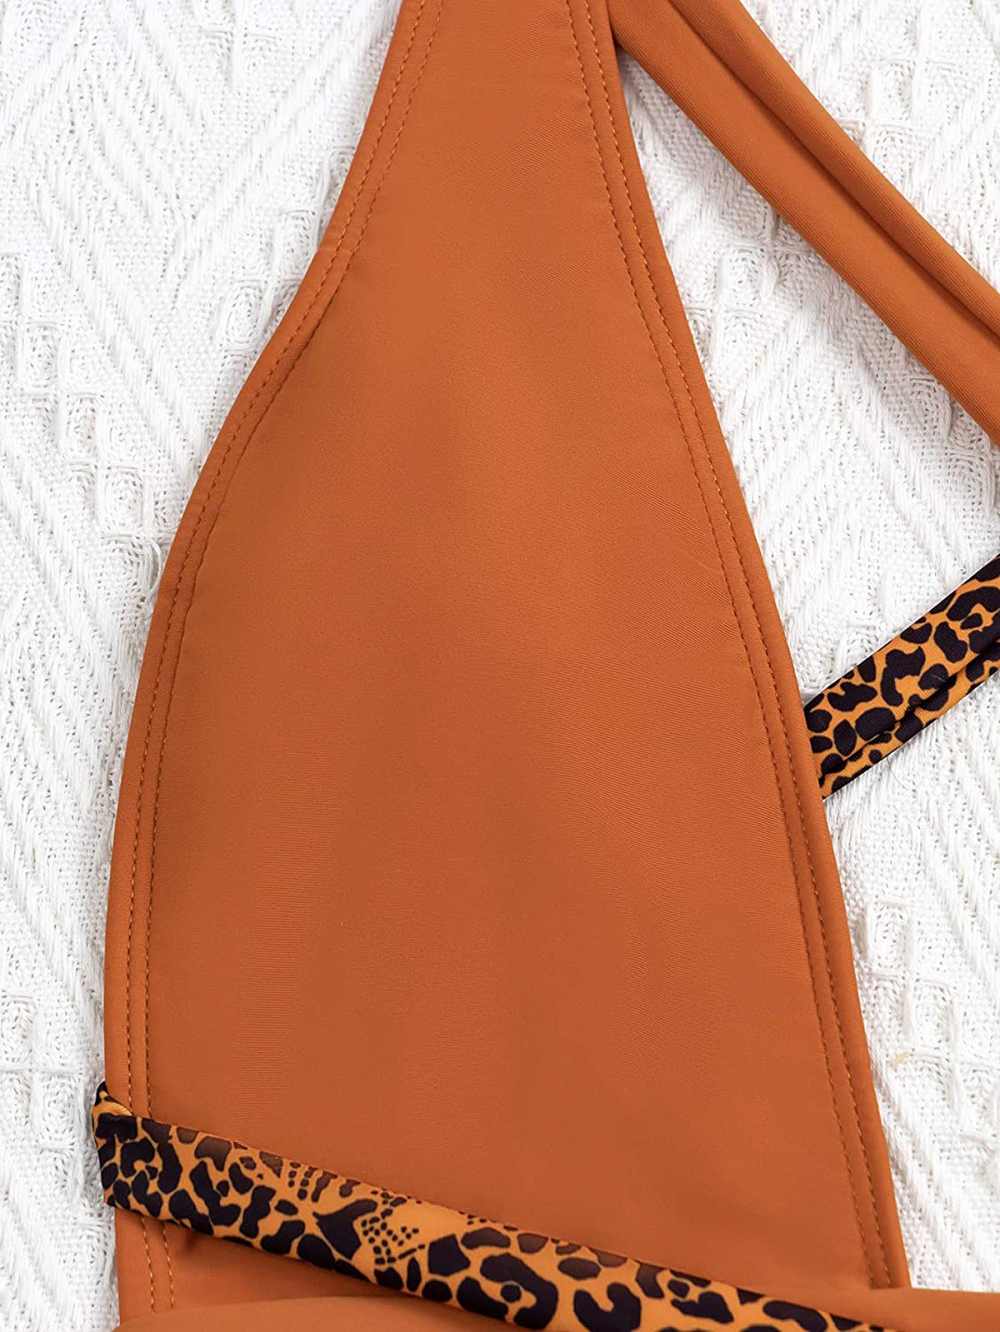 SOLY HUX Sexy Criss Cross One-Piece Swimsuit